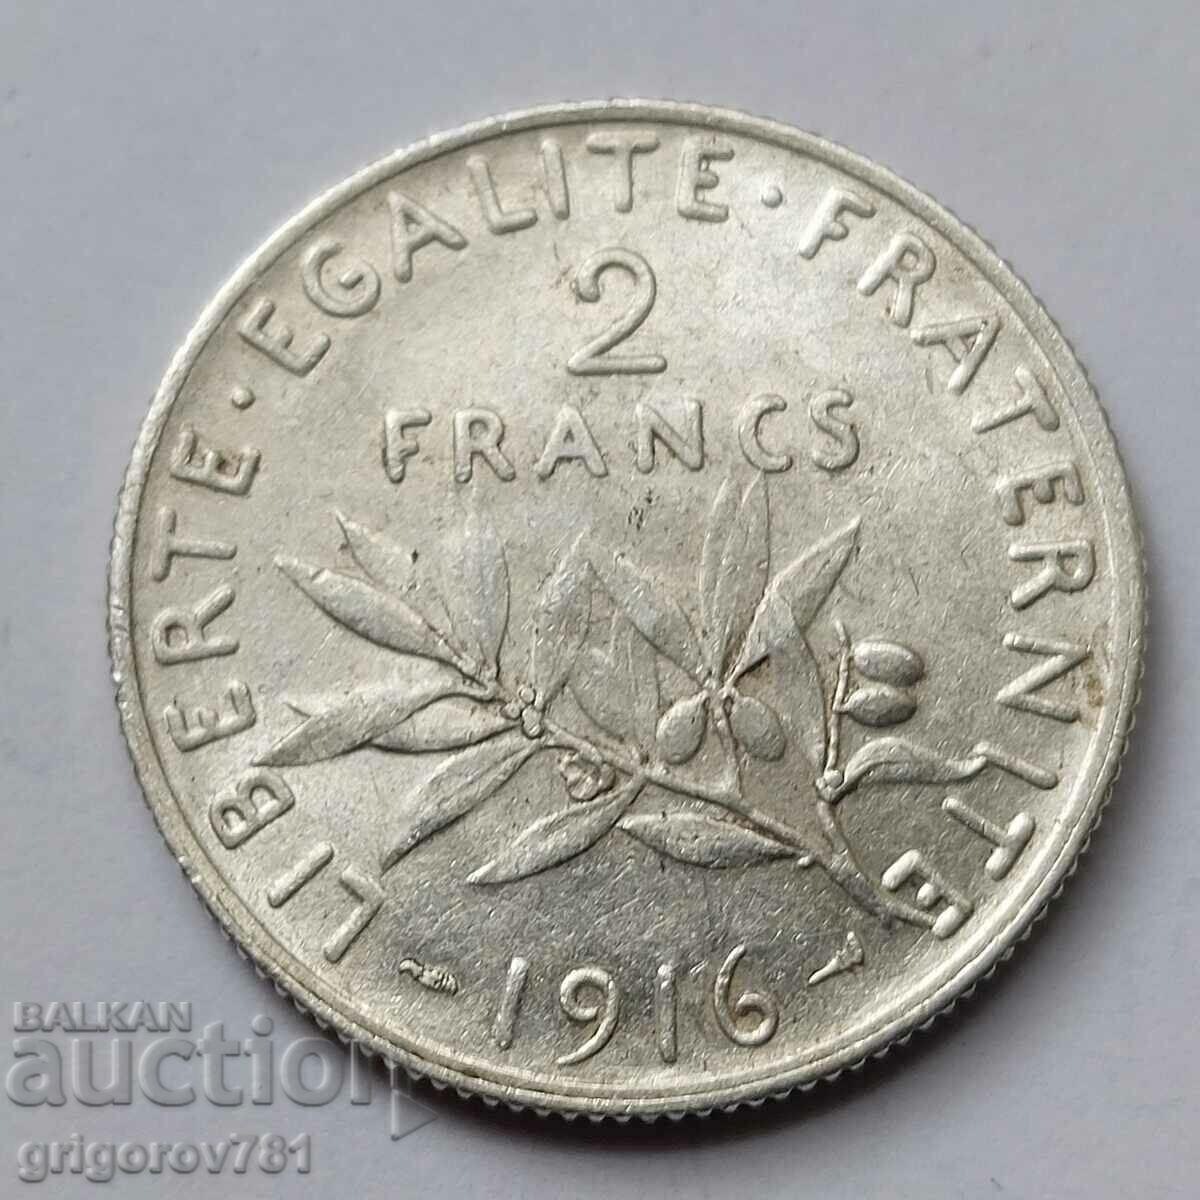 2 Francs Silver France 1916 - Silver Coin #82